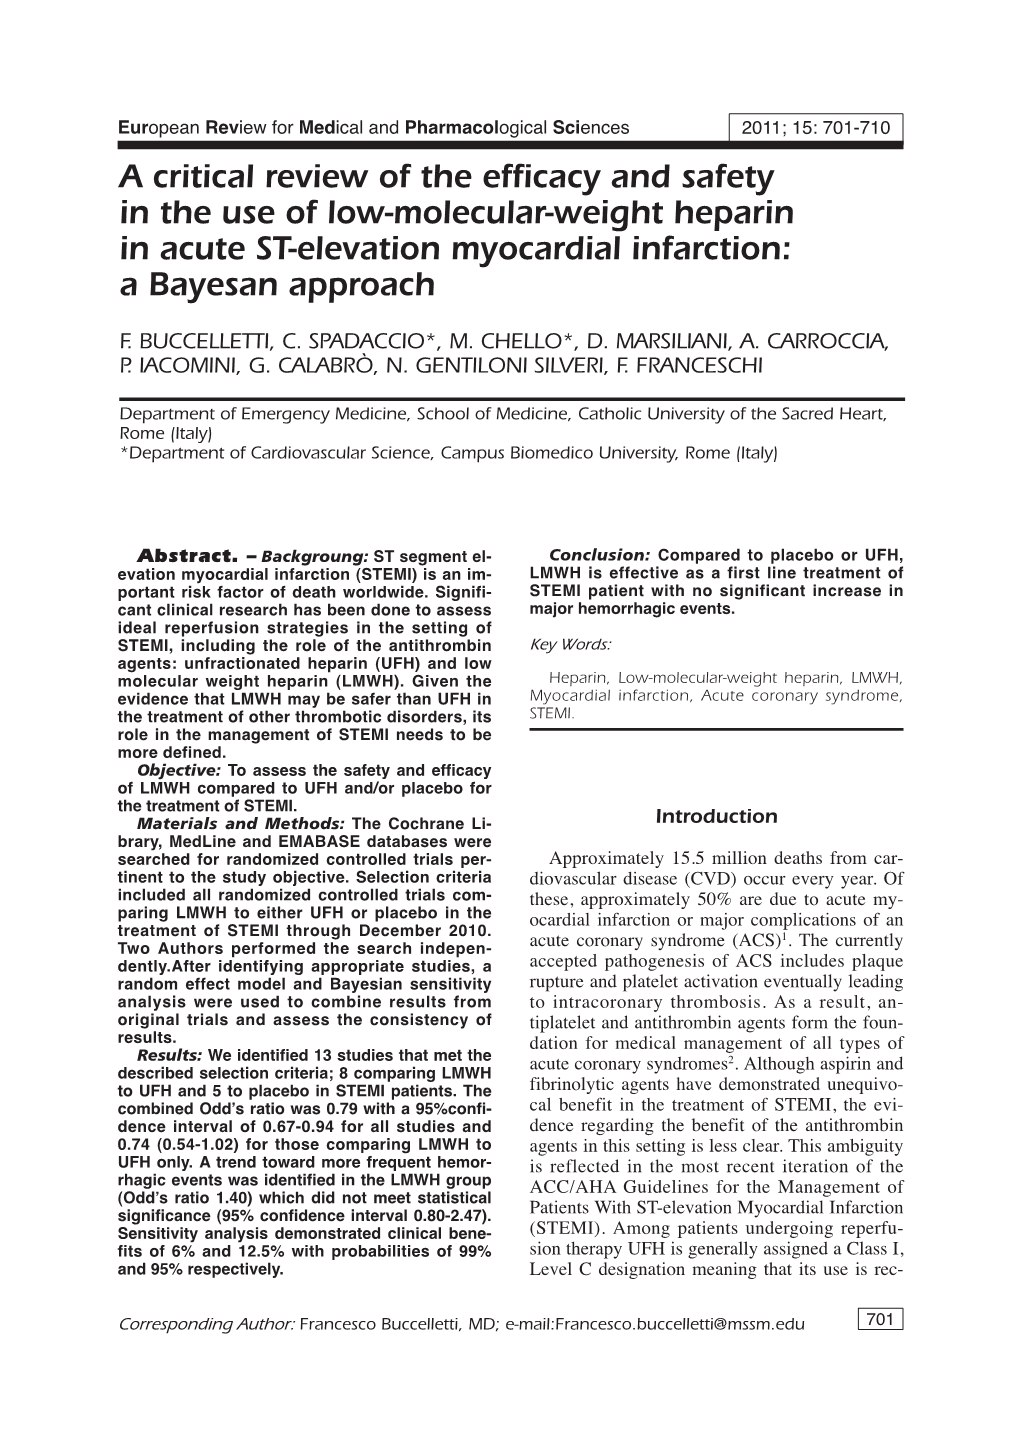 A Critical Review of the Efficacy and Safety in the Use of Low-Molecular-Weight Heparin in Acute ST-Elevation Myocardial Infarction: a Bayesan Approach